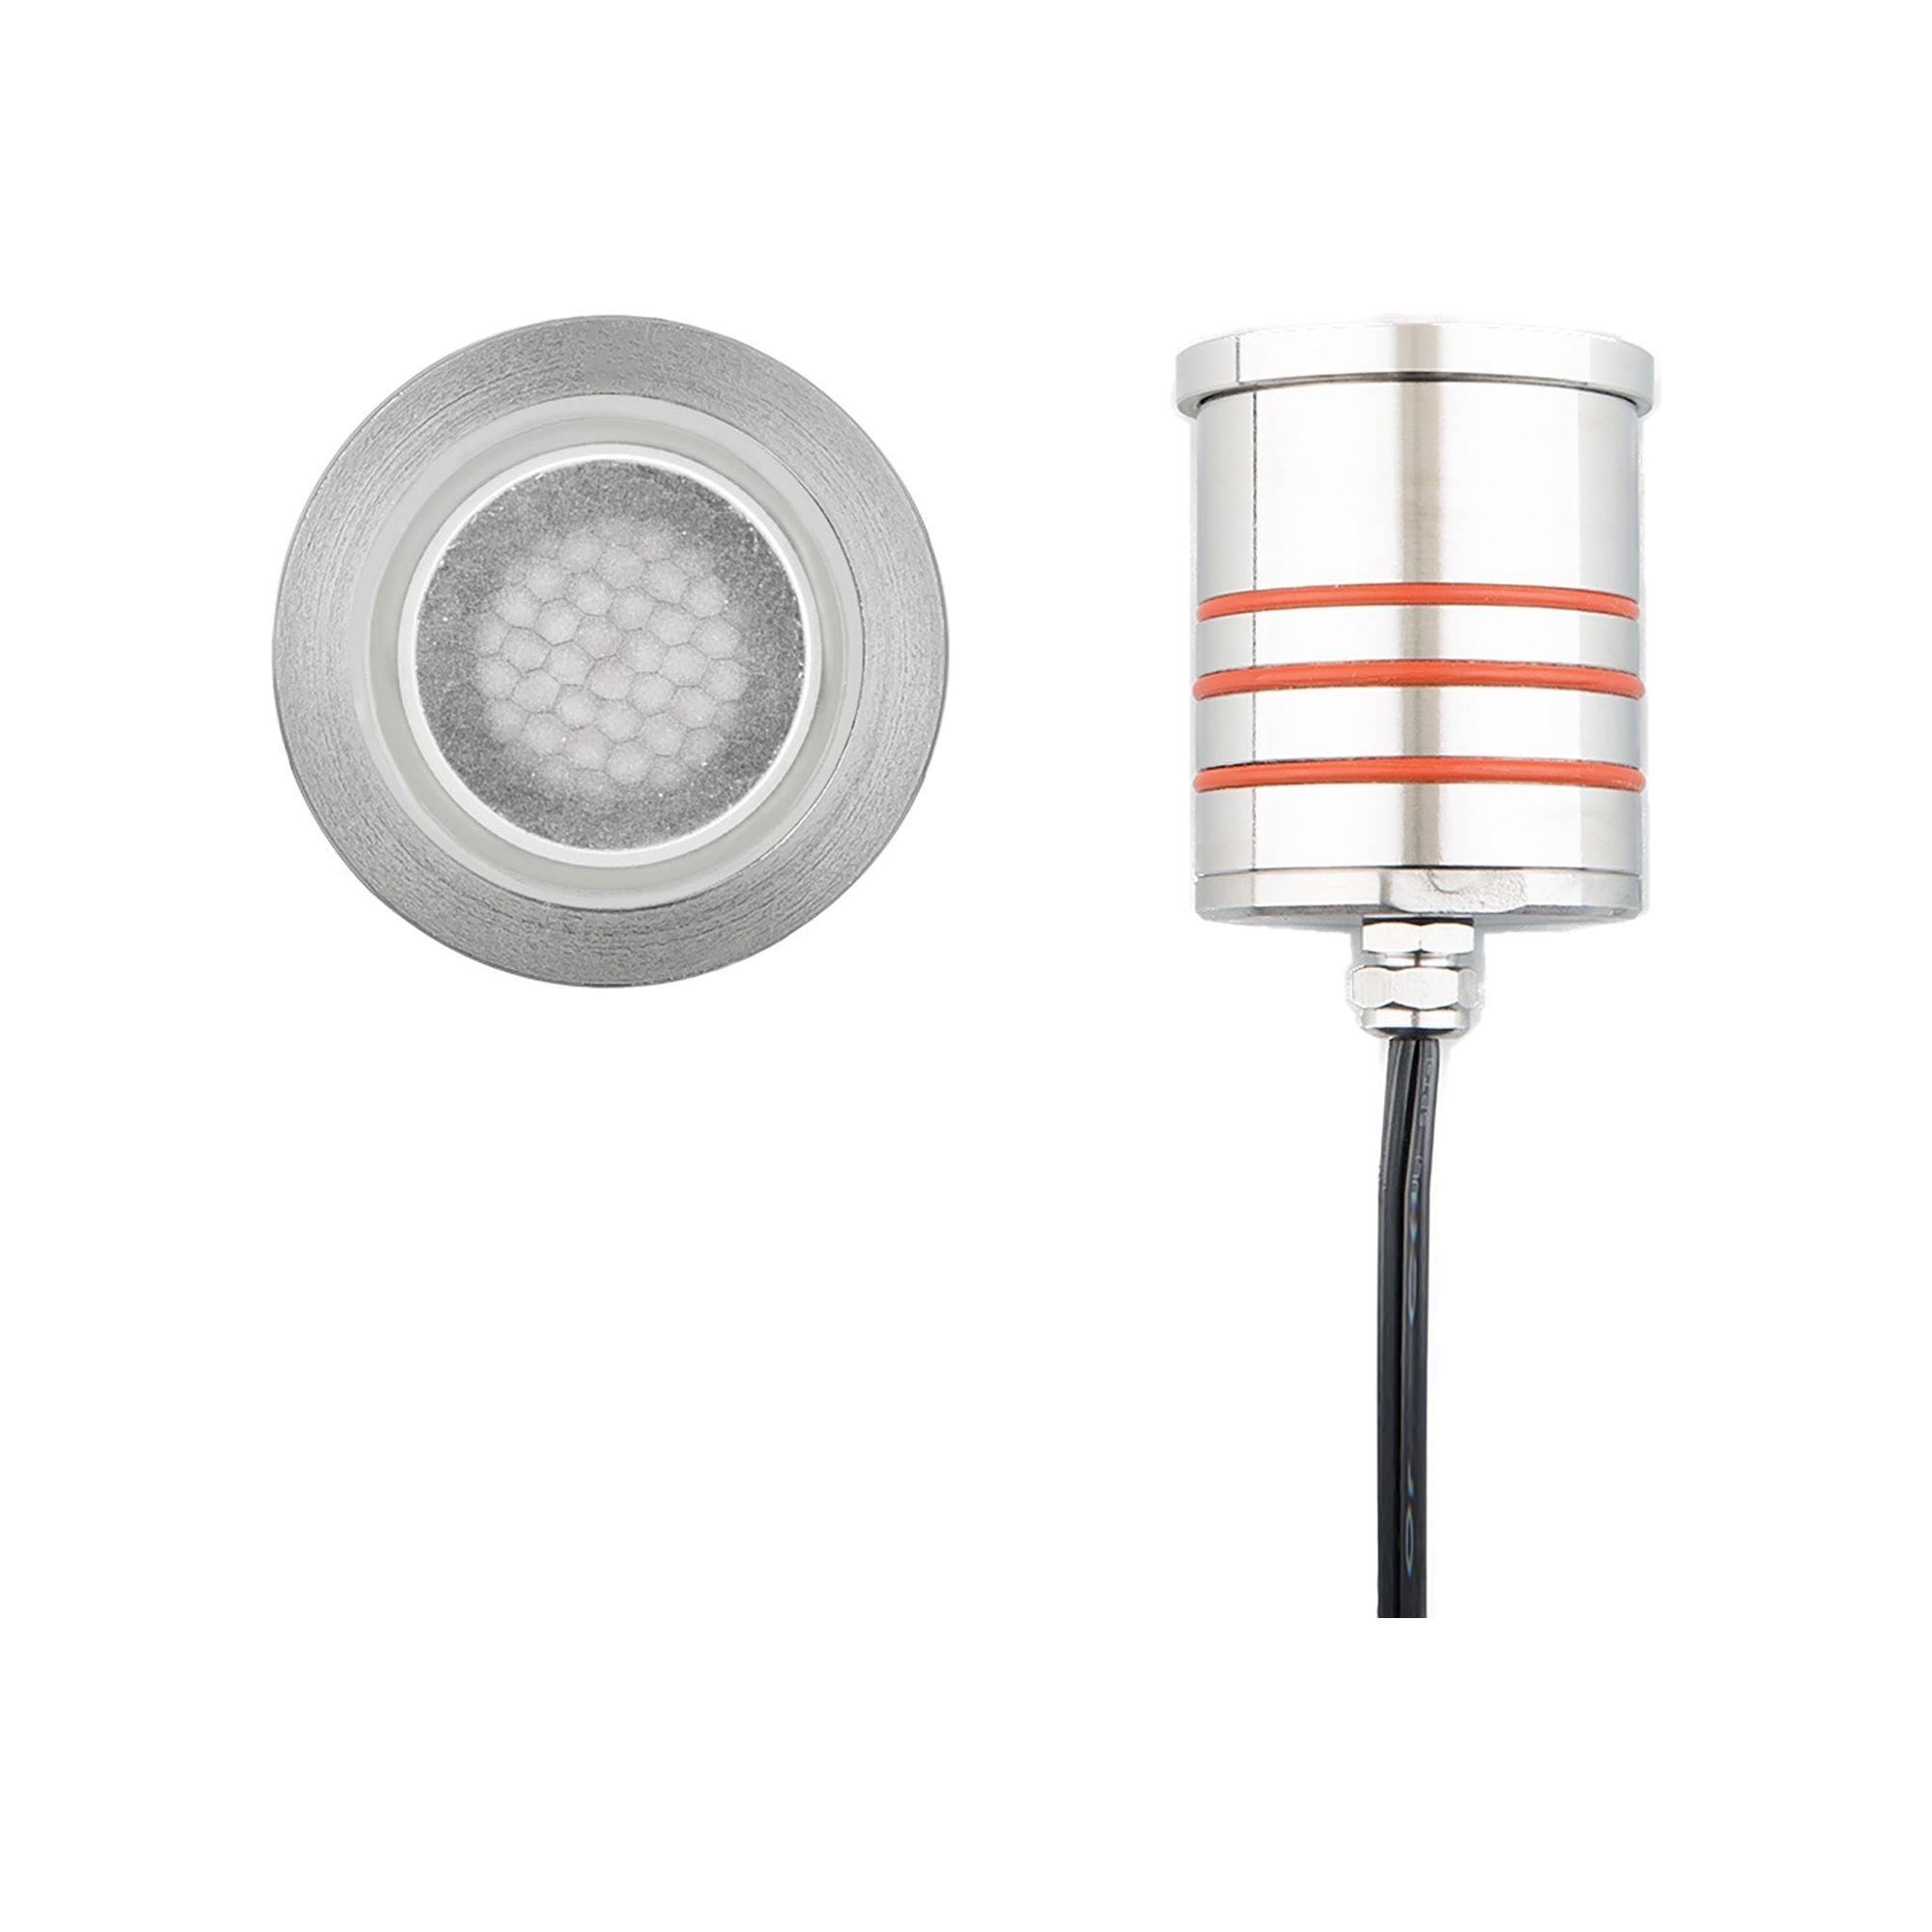 WAC Lighting - LED 2" 12V Round Low-Profile Top Inground Indicator Light with Hex Louver - Lights Canada